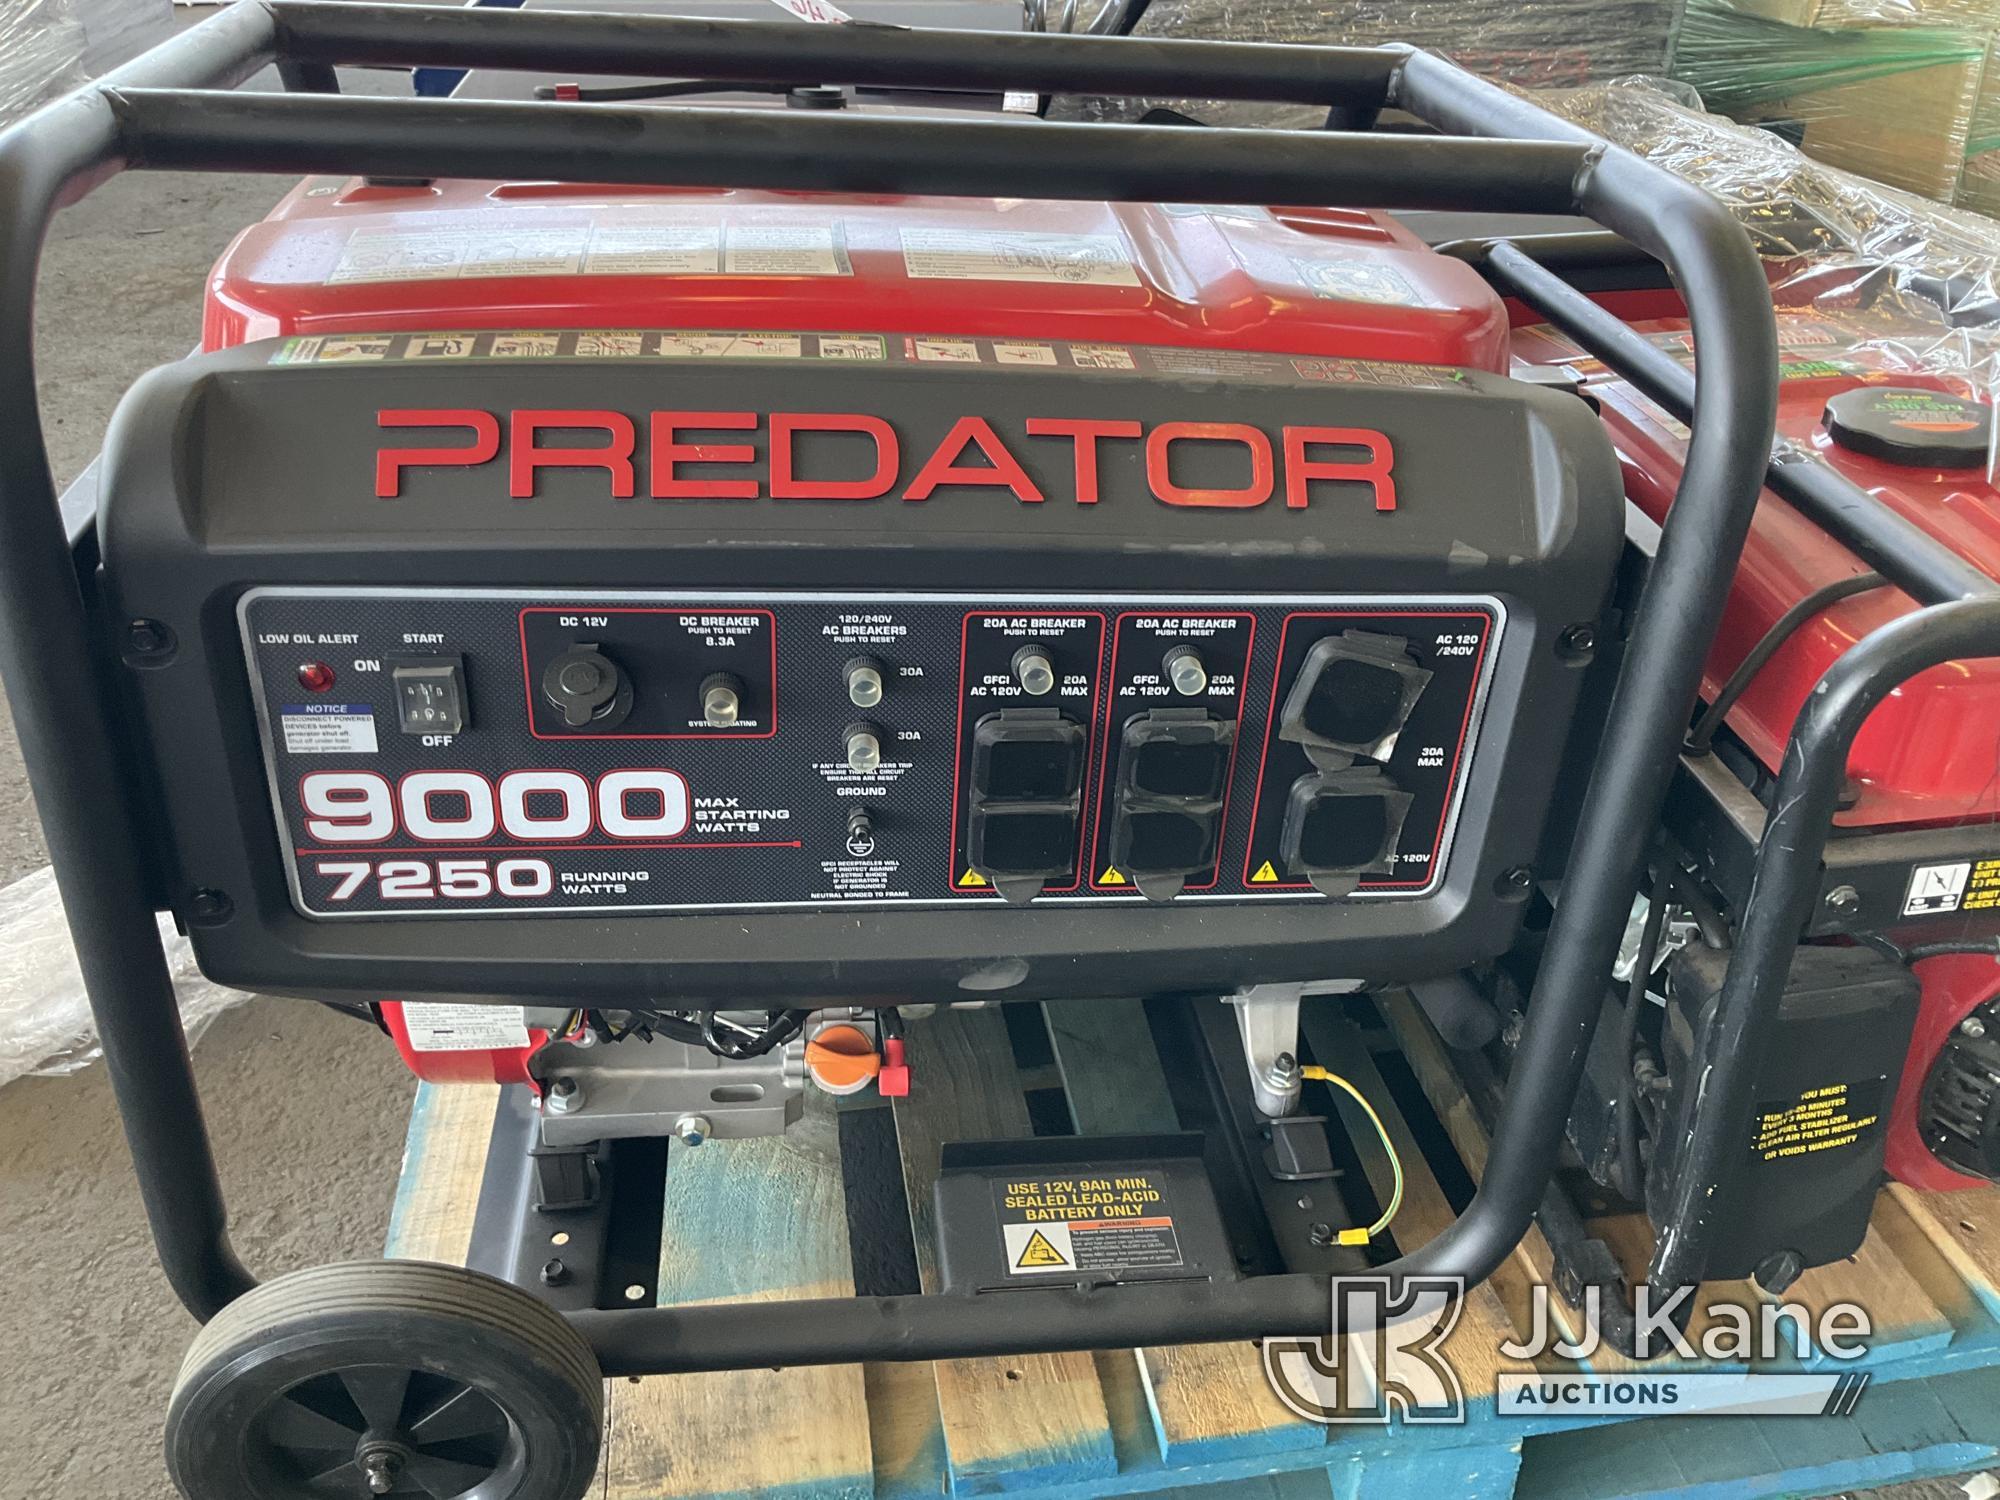 (Jurupa Valley, CA) 1 Predator 9000 Generator (Used) NOTE: This unit is being sold AS IS/WHERE IS vi